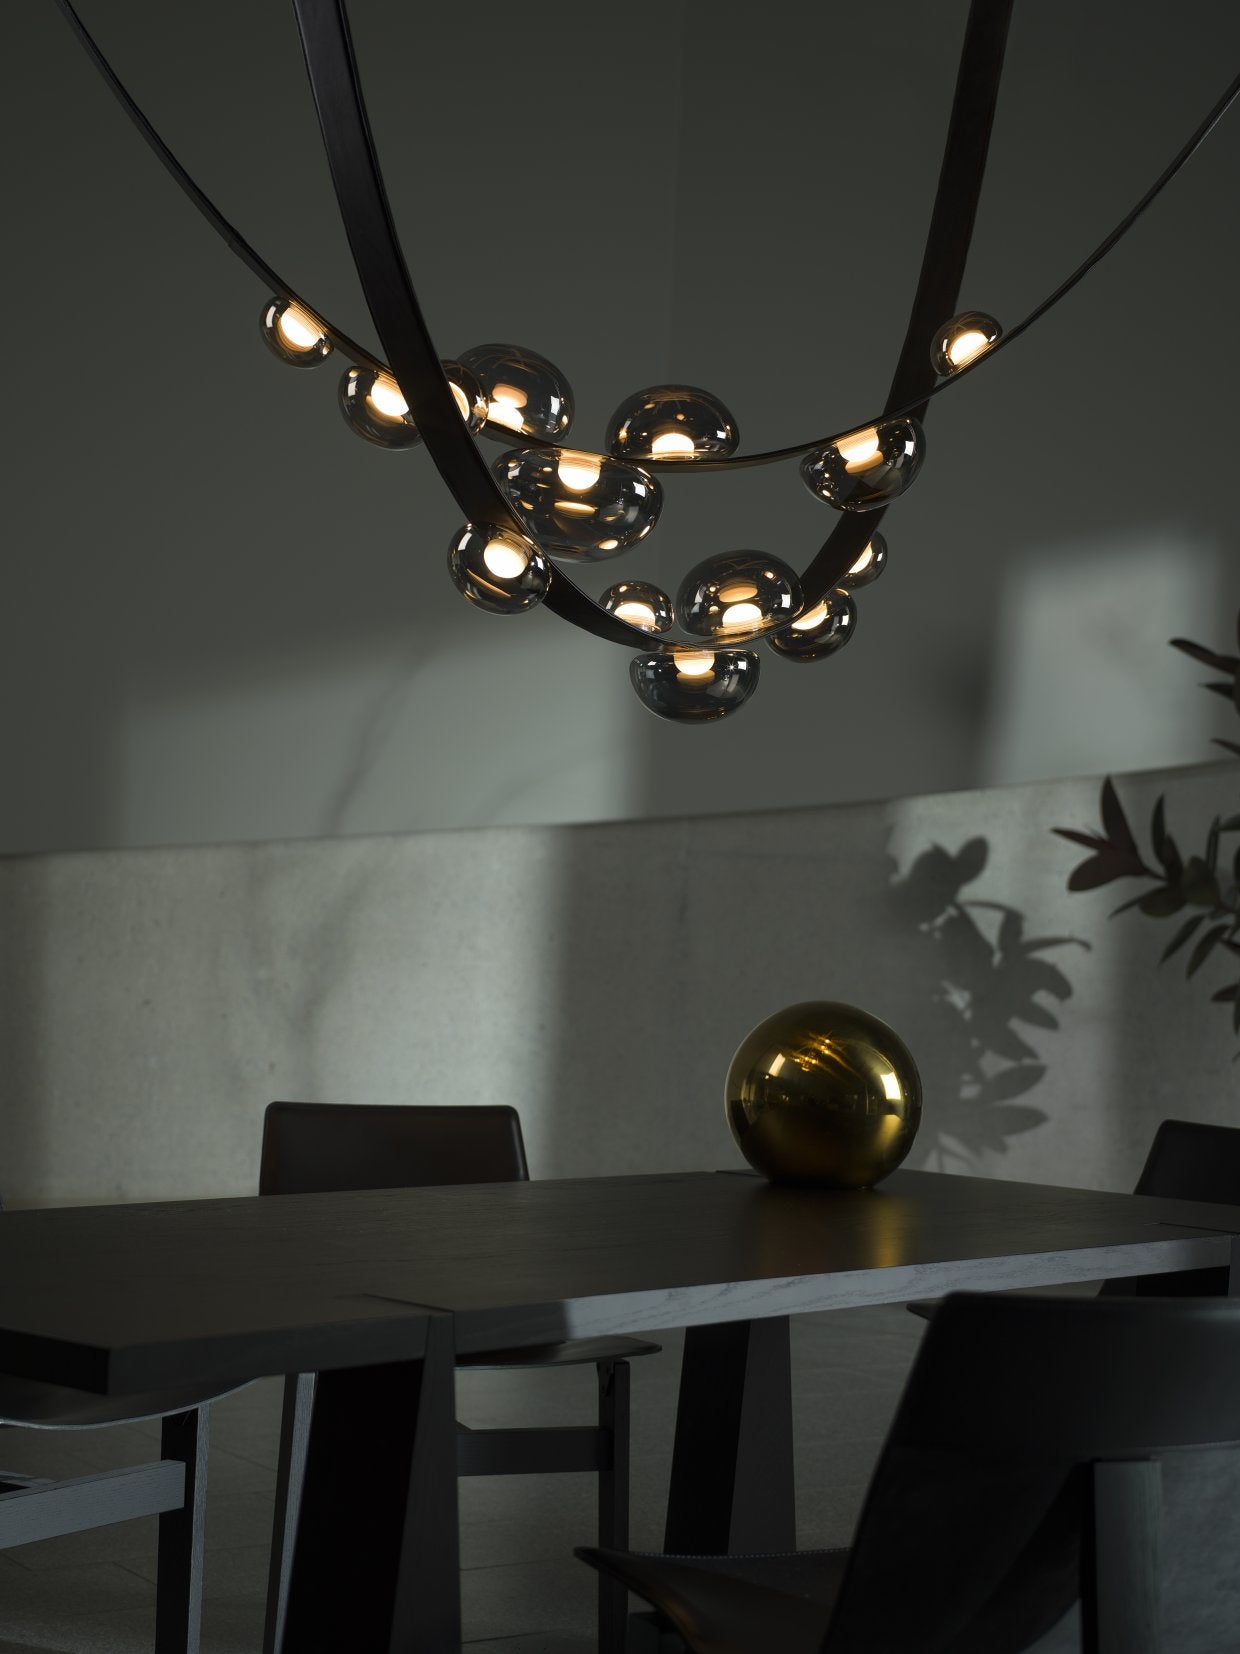 Bomma Dew Drops chandelier over a dark dining table